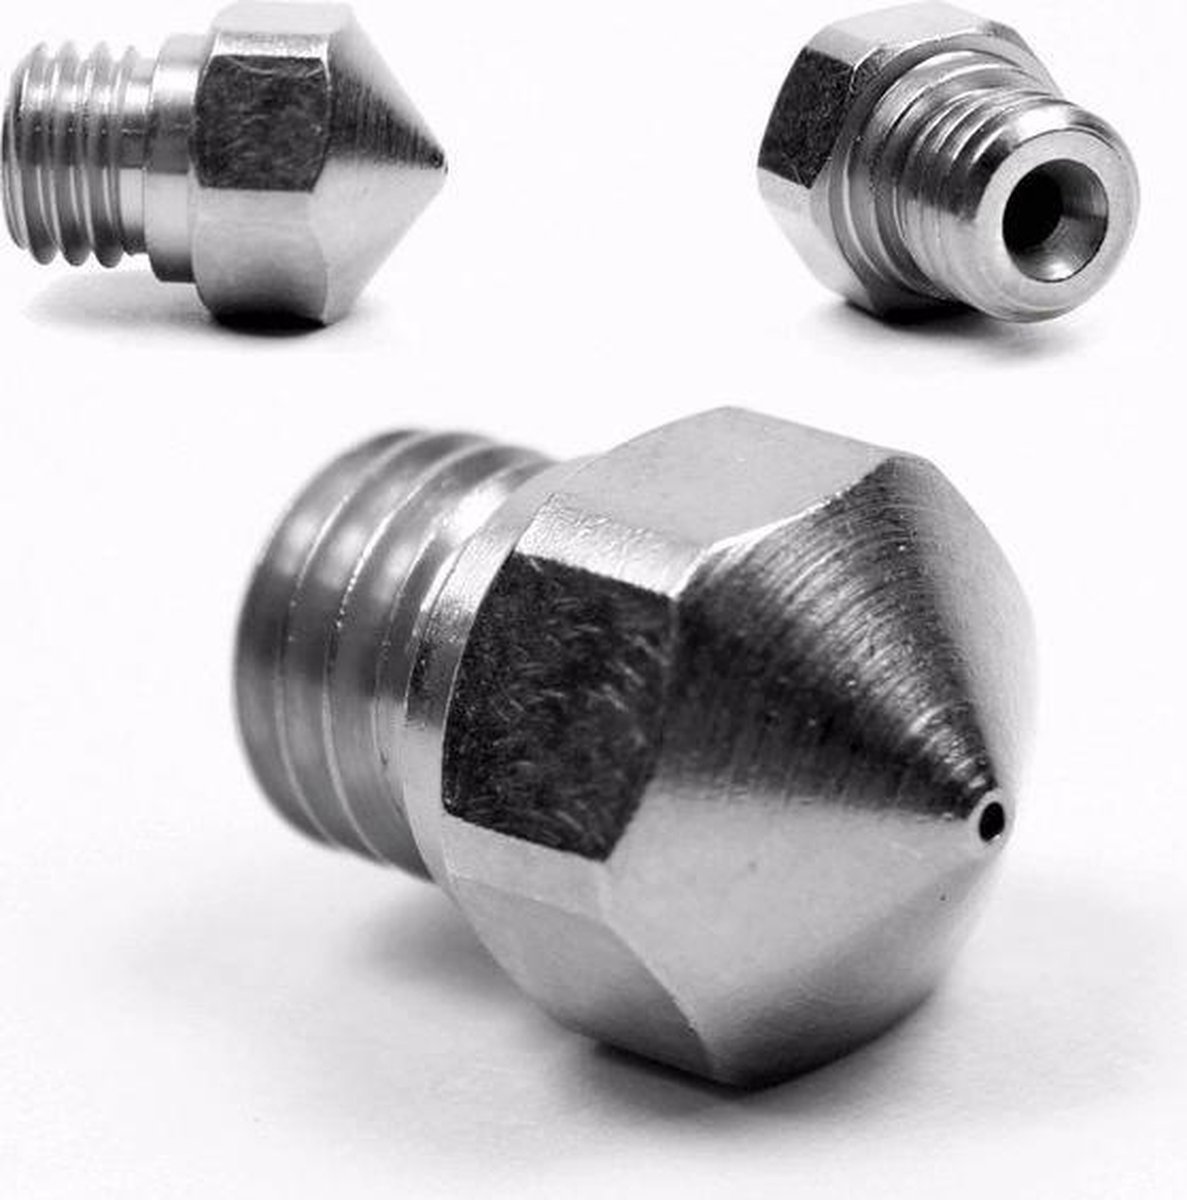 Micro Swiss - 0.4 mm - nozzle for MK10 All Metal Hotend ONLY A2 - Hardened Steel